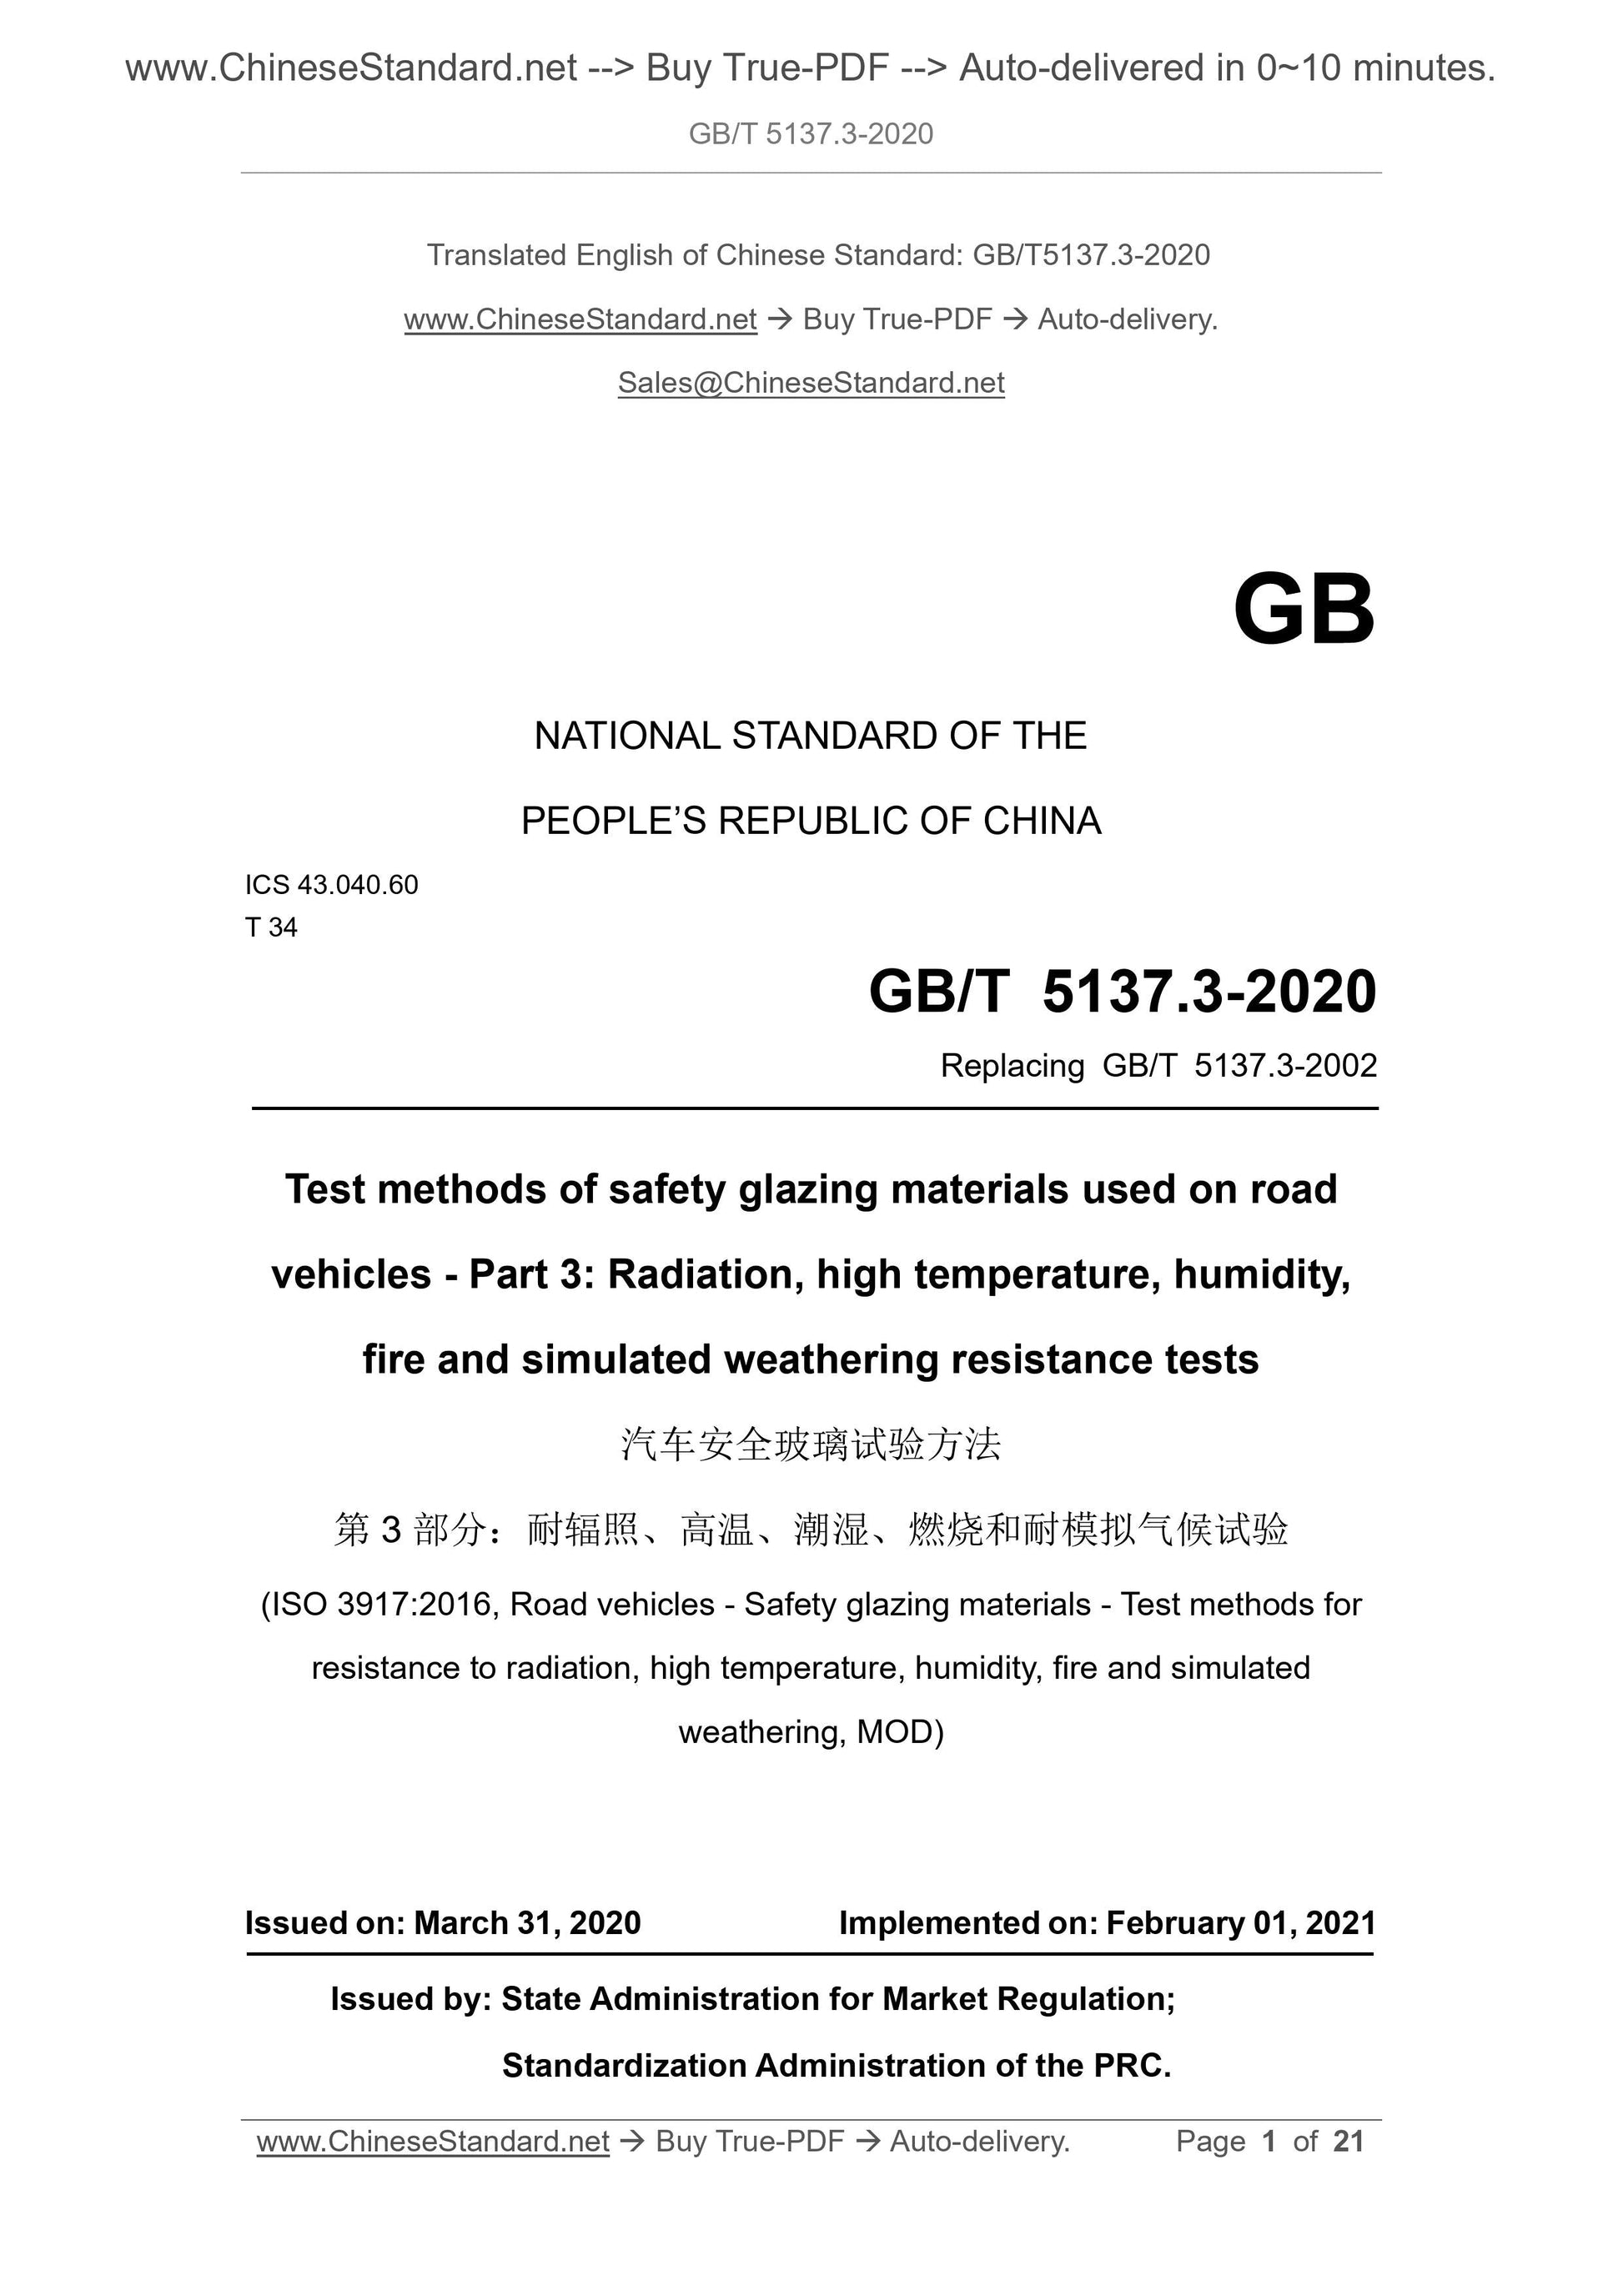 GB/T 5137.3-2020 Page 1